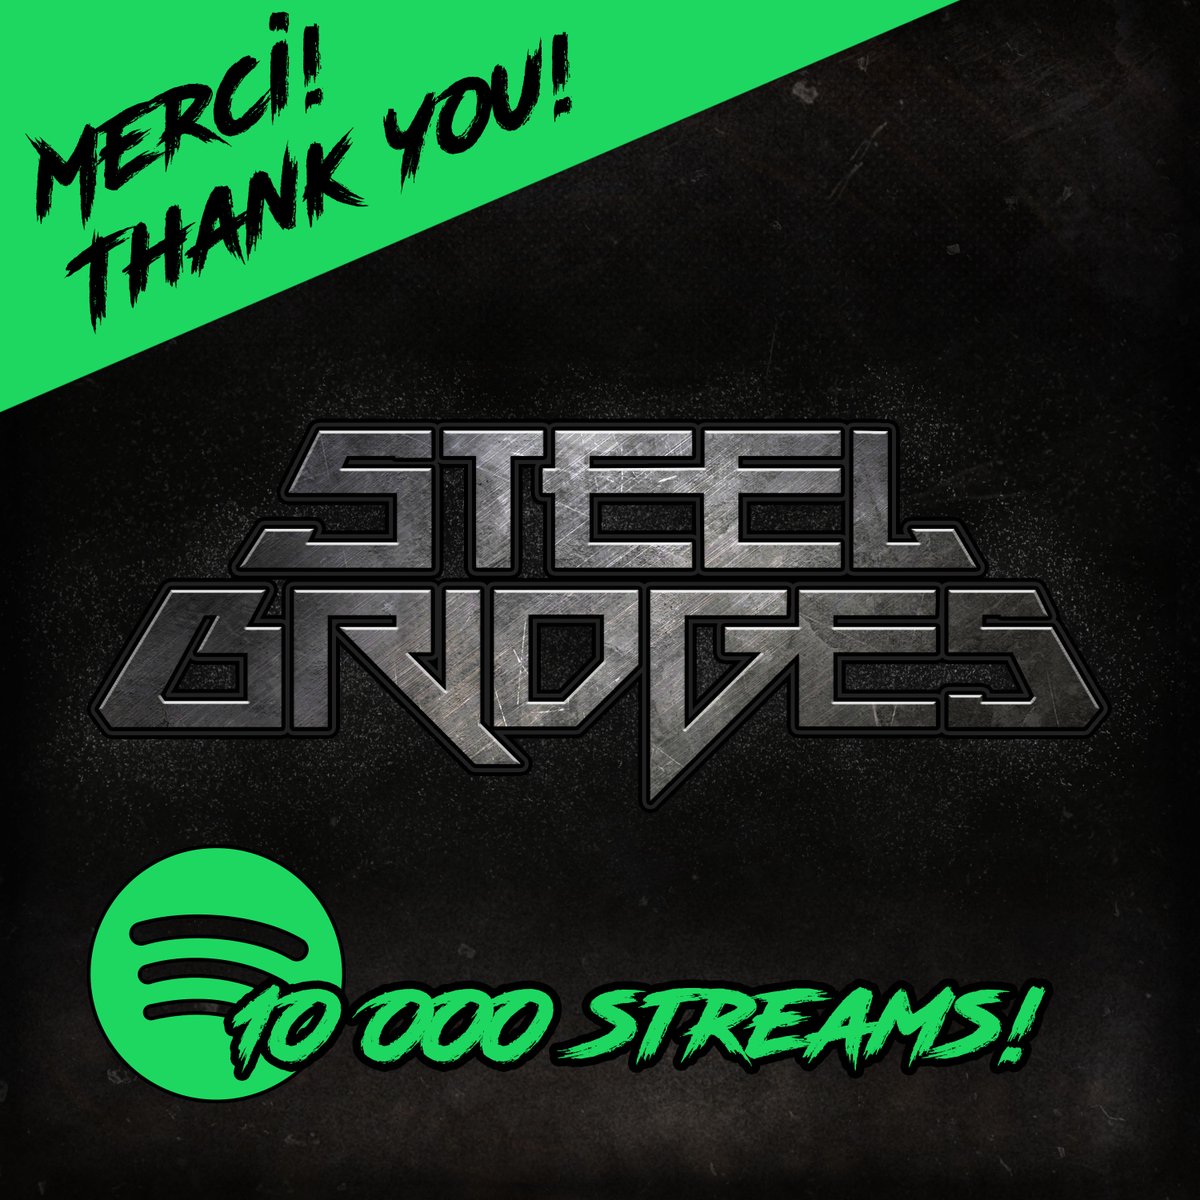 Steel Bridges songs have now reached 10 000 streams on Spotify. Thanks to everyone who listens! You can listen to the latest album here: steelbridges.fanlink.to/UnderTheRug